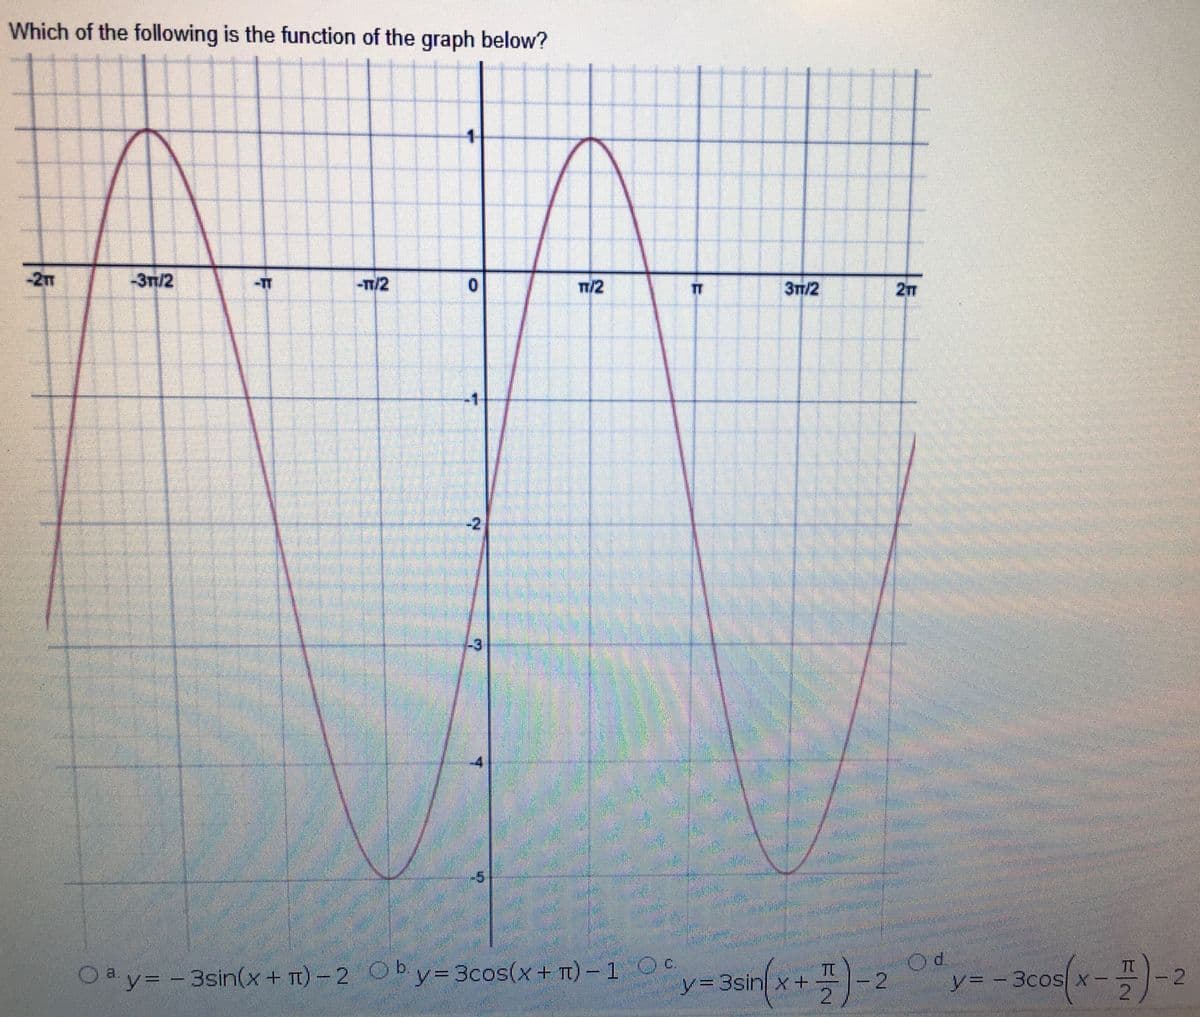 Which of the following is the function of the graph below?
1-
-2m
-3Tm/2
-TT
-T/2
TT/2
27
TT
3TT/2
-2
TT
Od.
Oa y= - 3sin(x+ T) - 2 Ob. y= 3cos(x+ T) – 1 O.
2
y=3sin x +
y%3 - 3cos x-
2.
